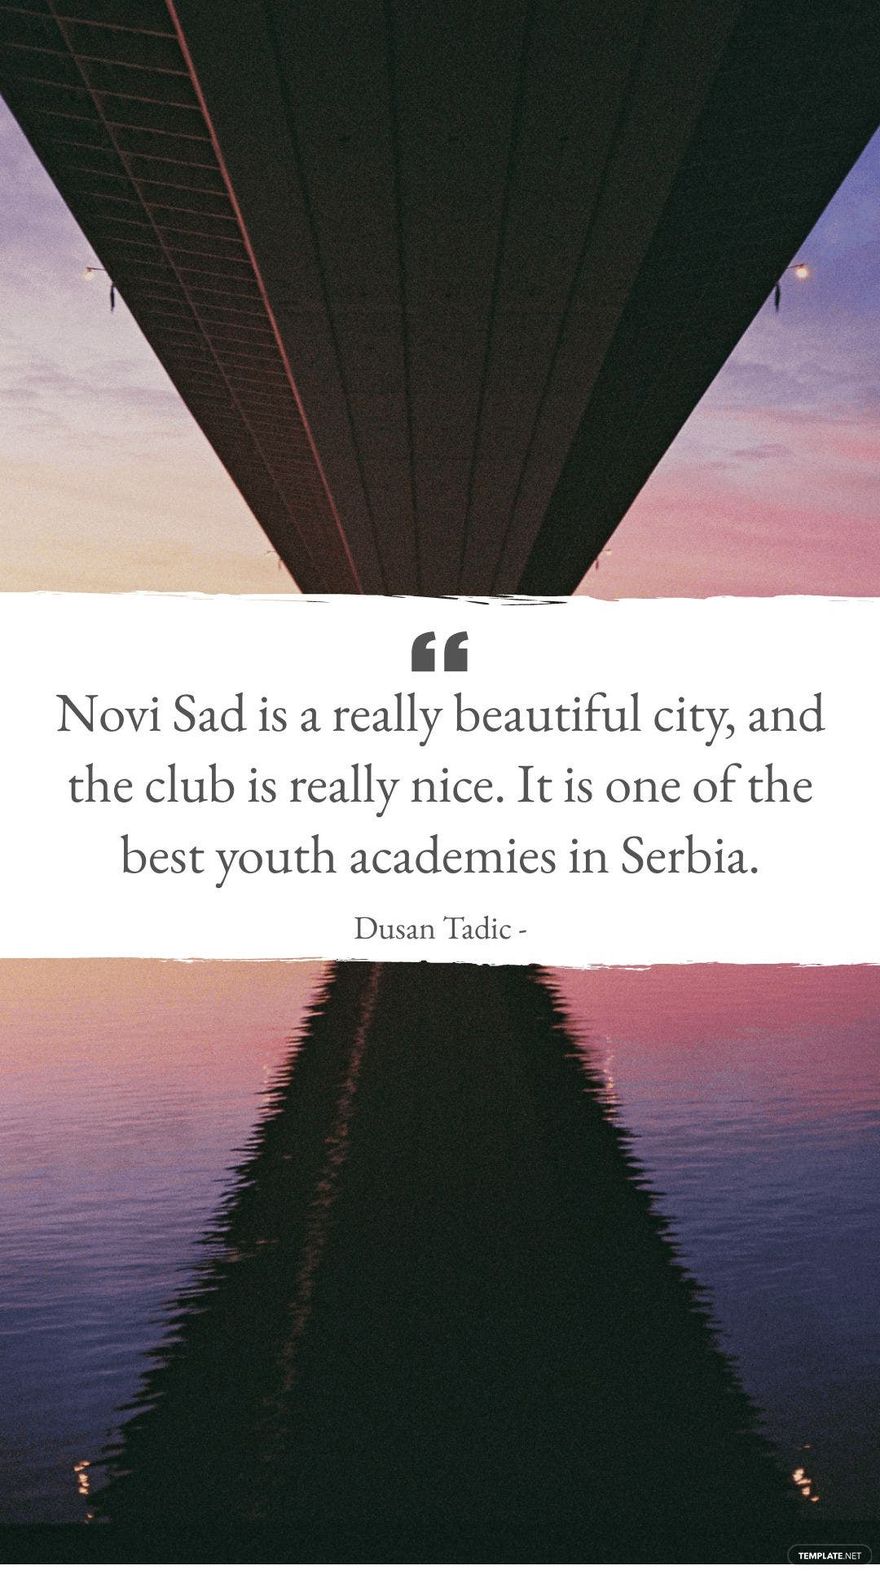 Dusan Tadic - Novi Sad is a really beautiful city, and the club is really nice. It is one of the best youth academies in Serbia.